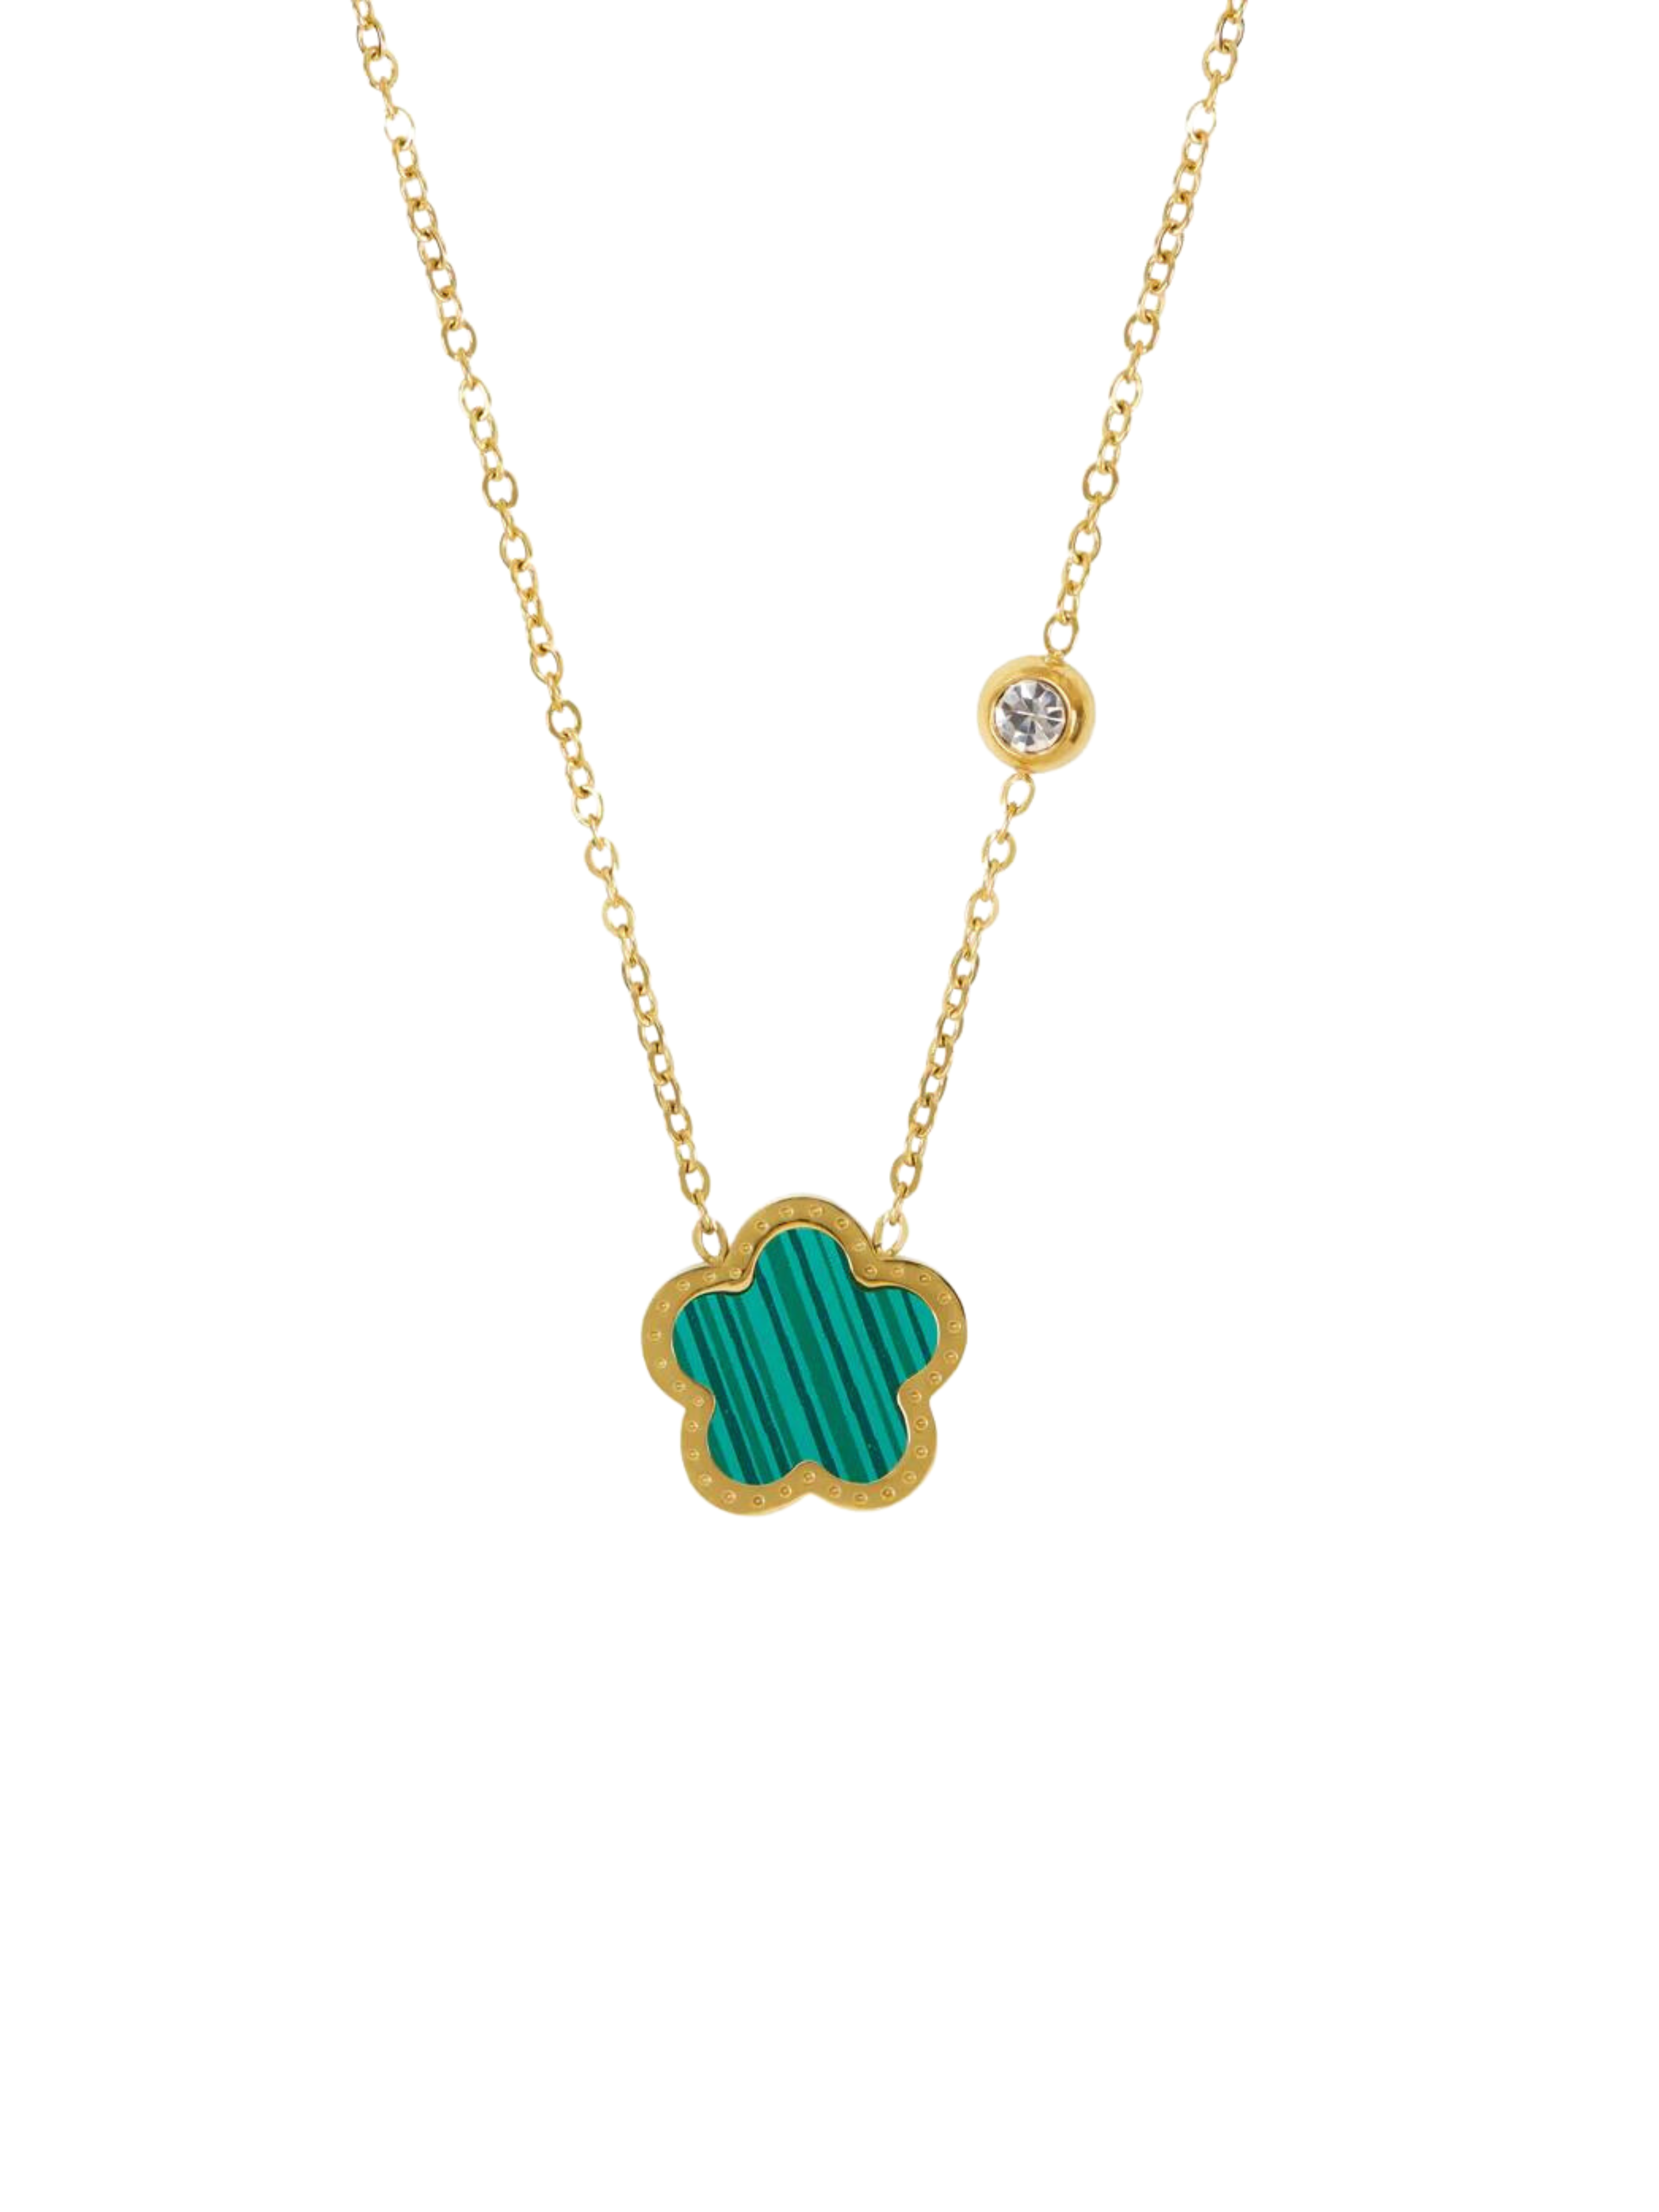 GOLDxTEAL gold plated clover pendant necklace.